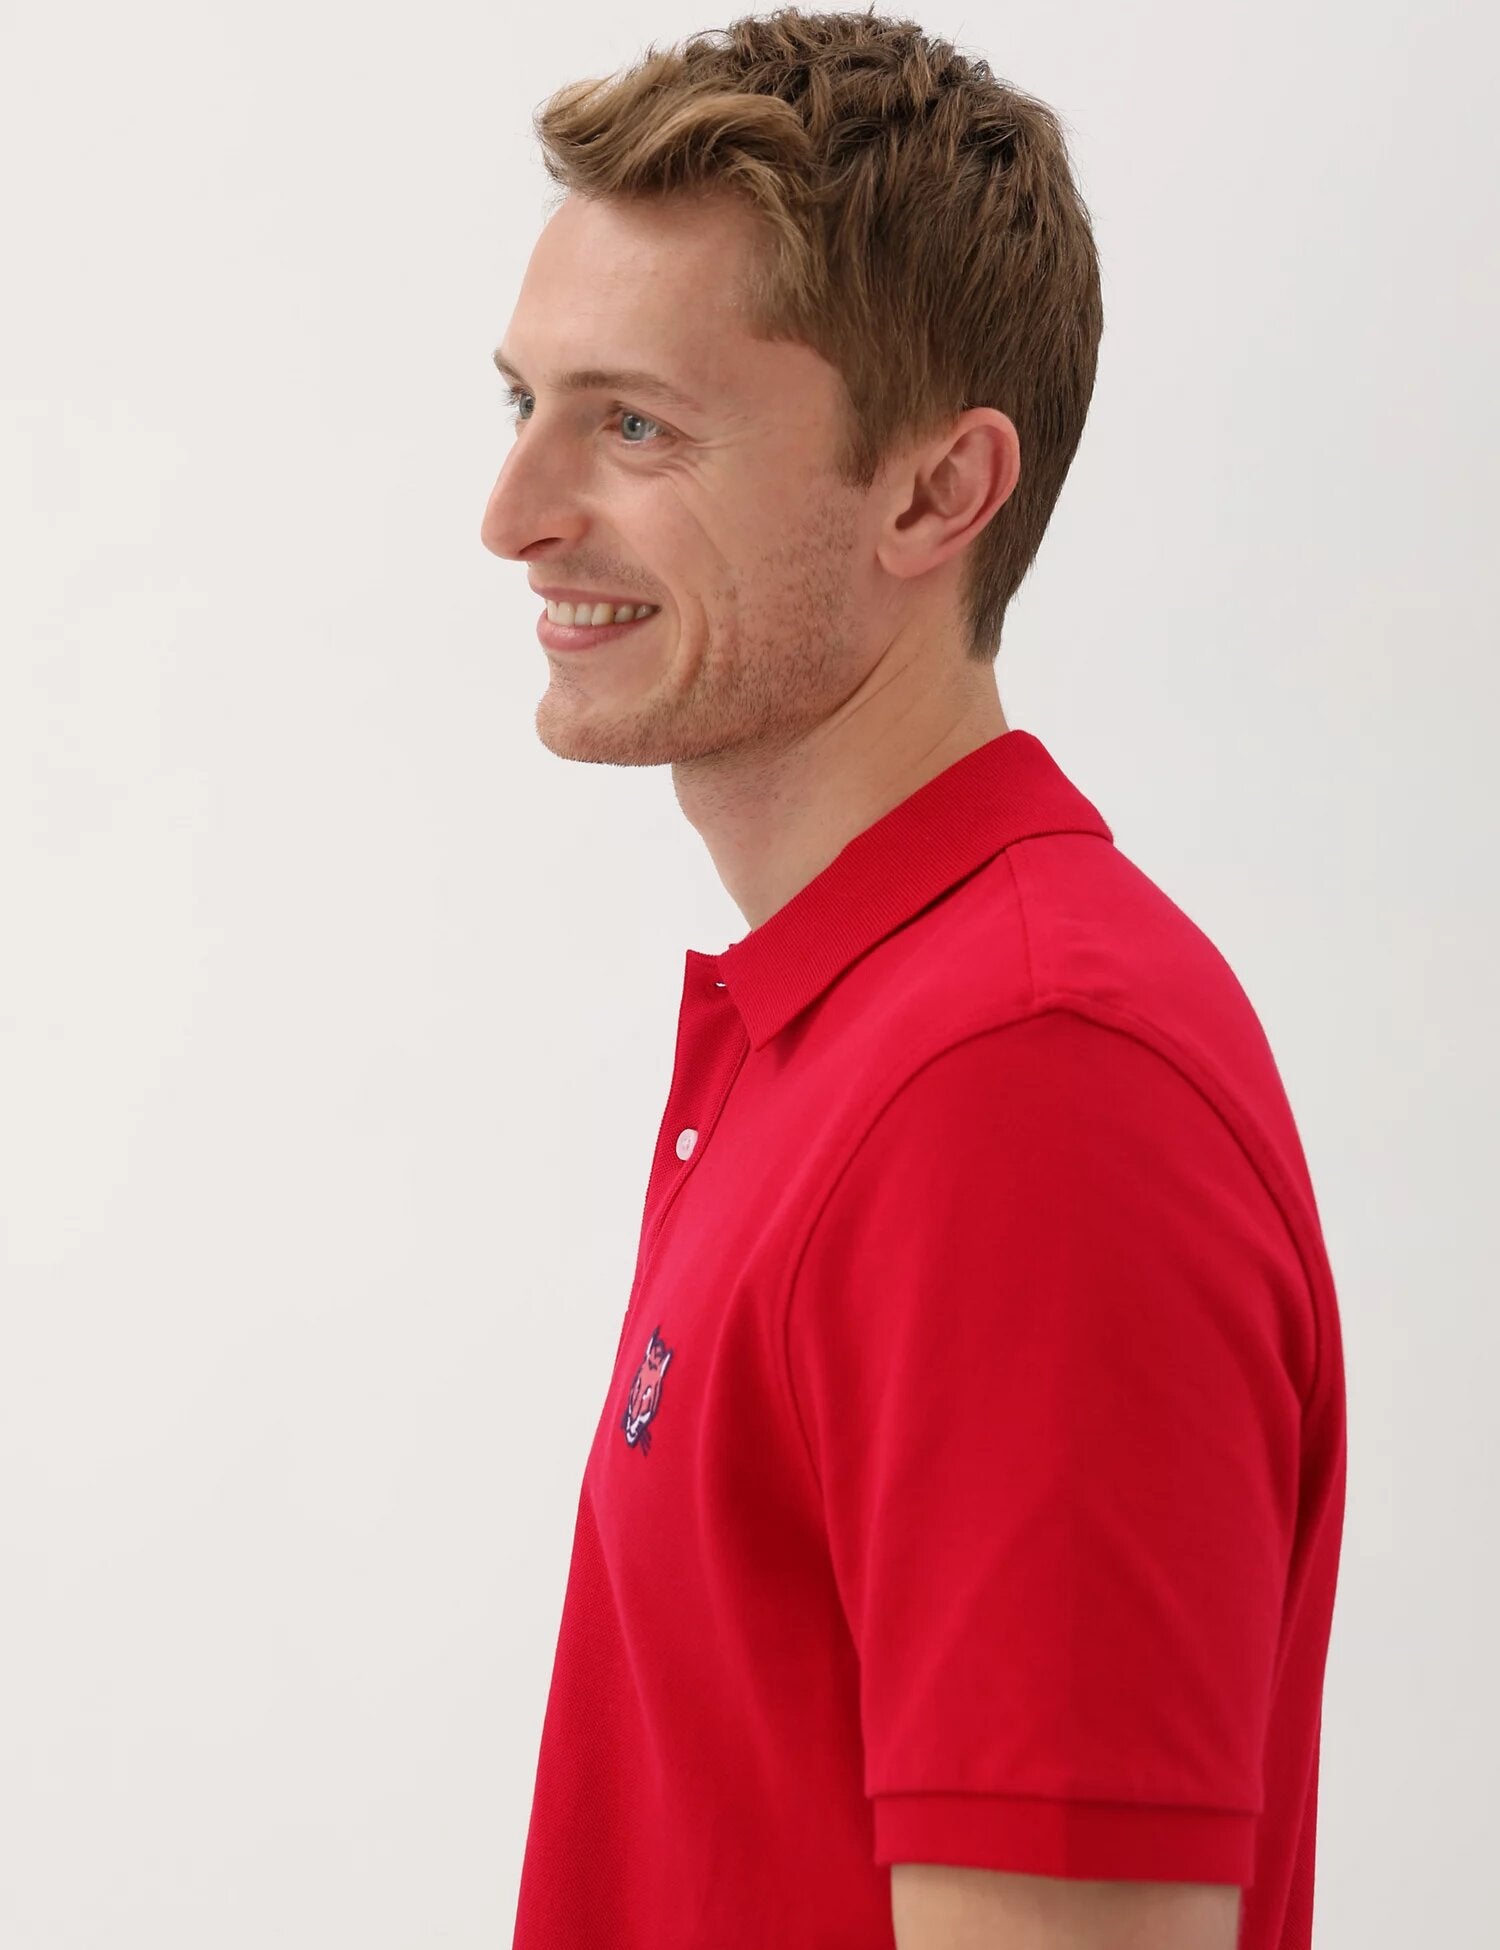 Pure Cotton Chinese New Year Tiger Polo